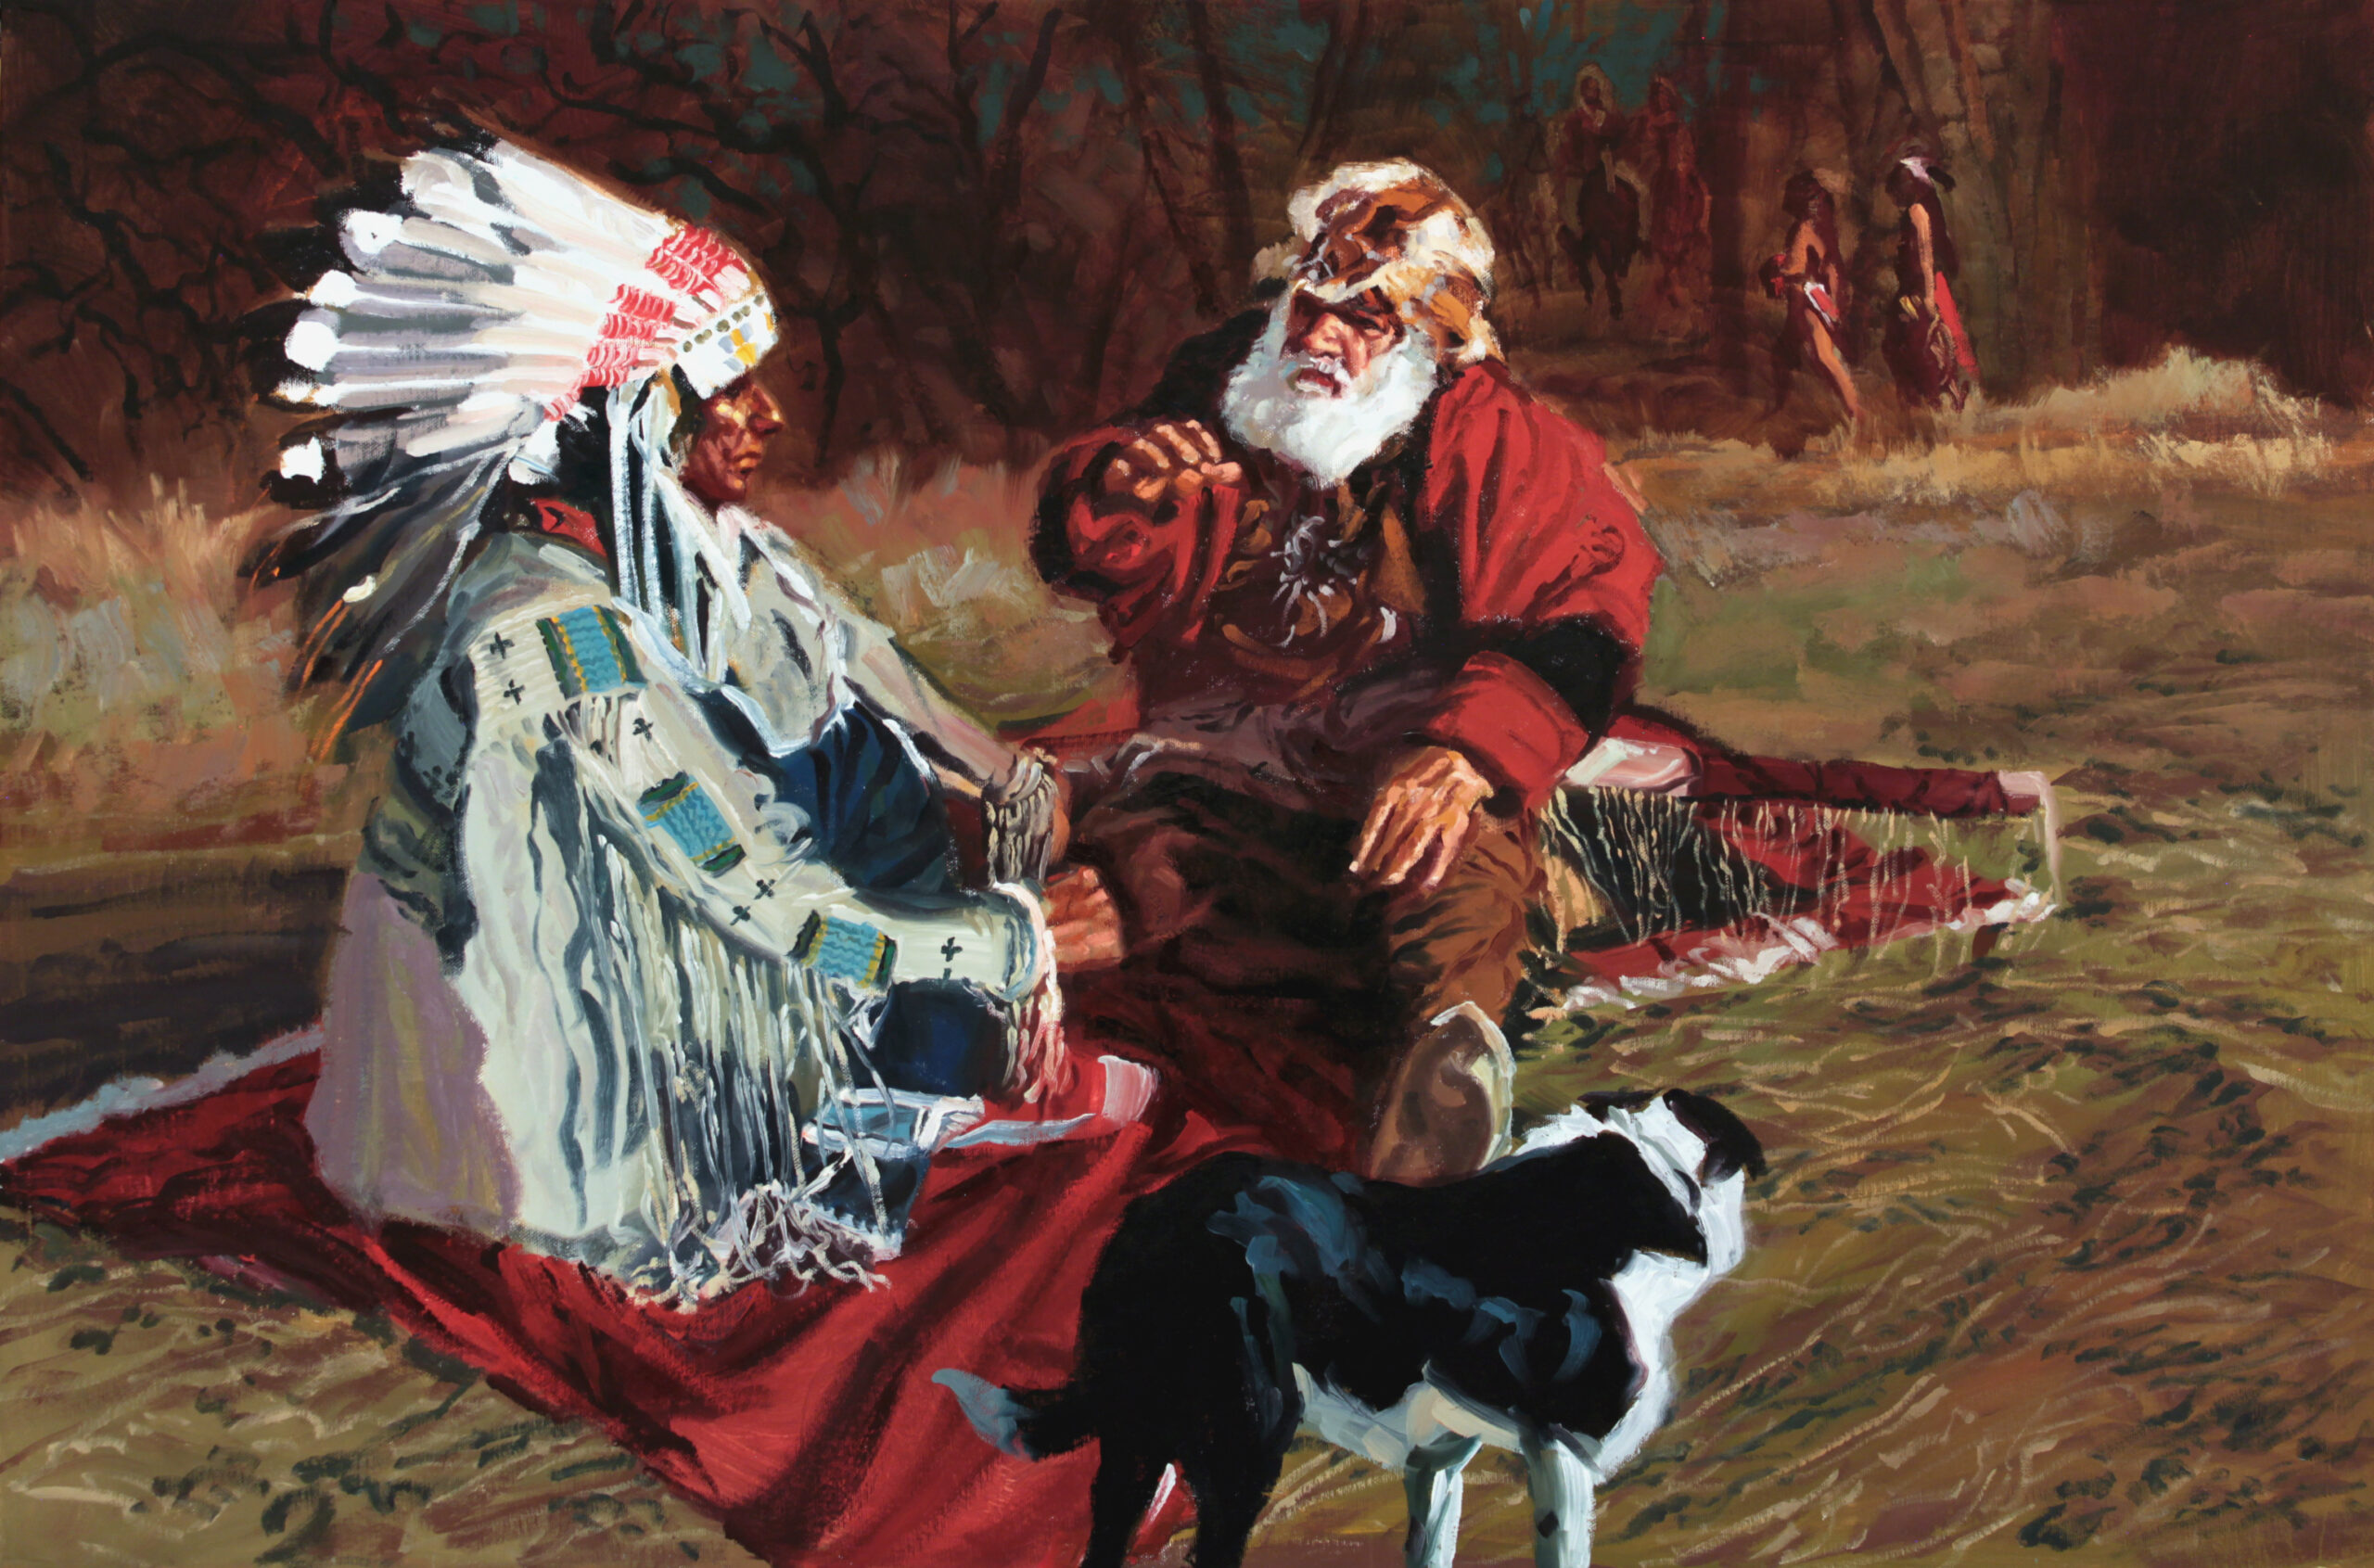 painting of a native american wearing a headress and seated on a blanket with an older white man, talking. THere is a dog in tthe foreground and two native american women walking in the background